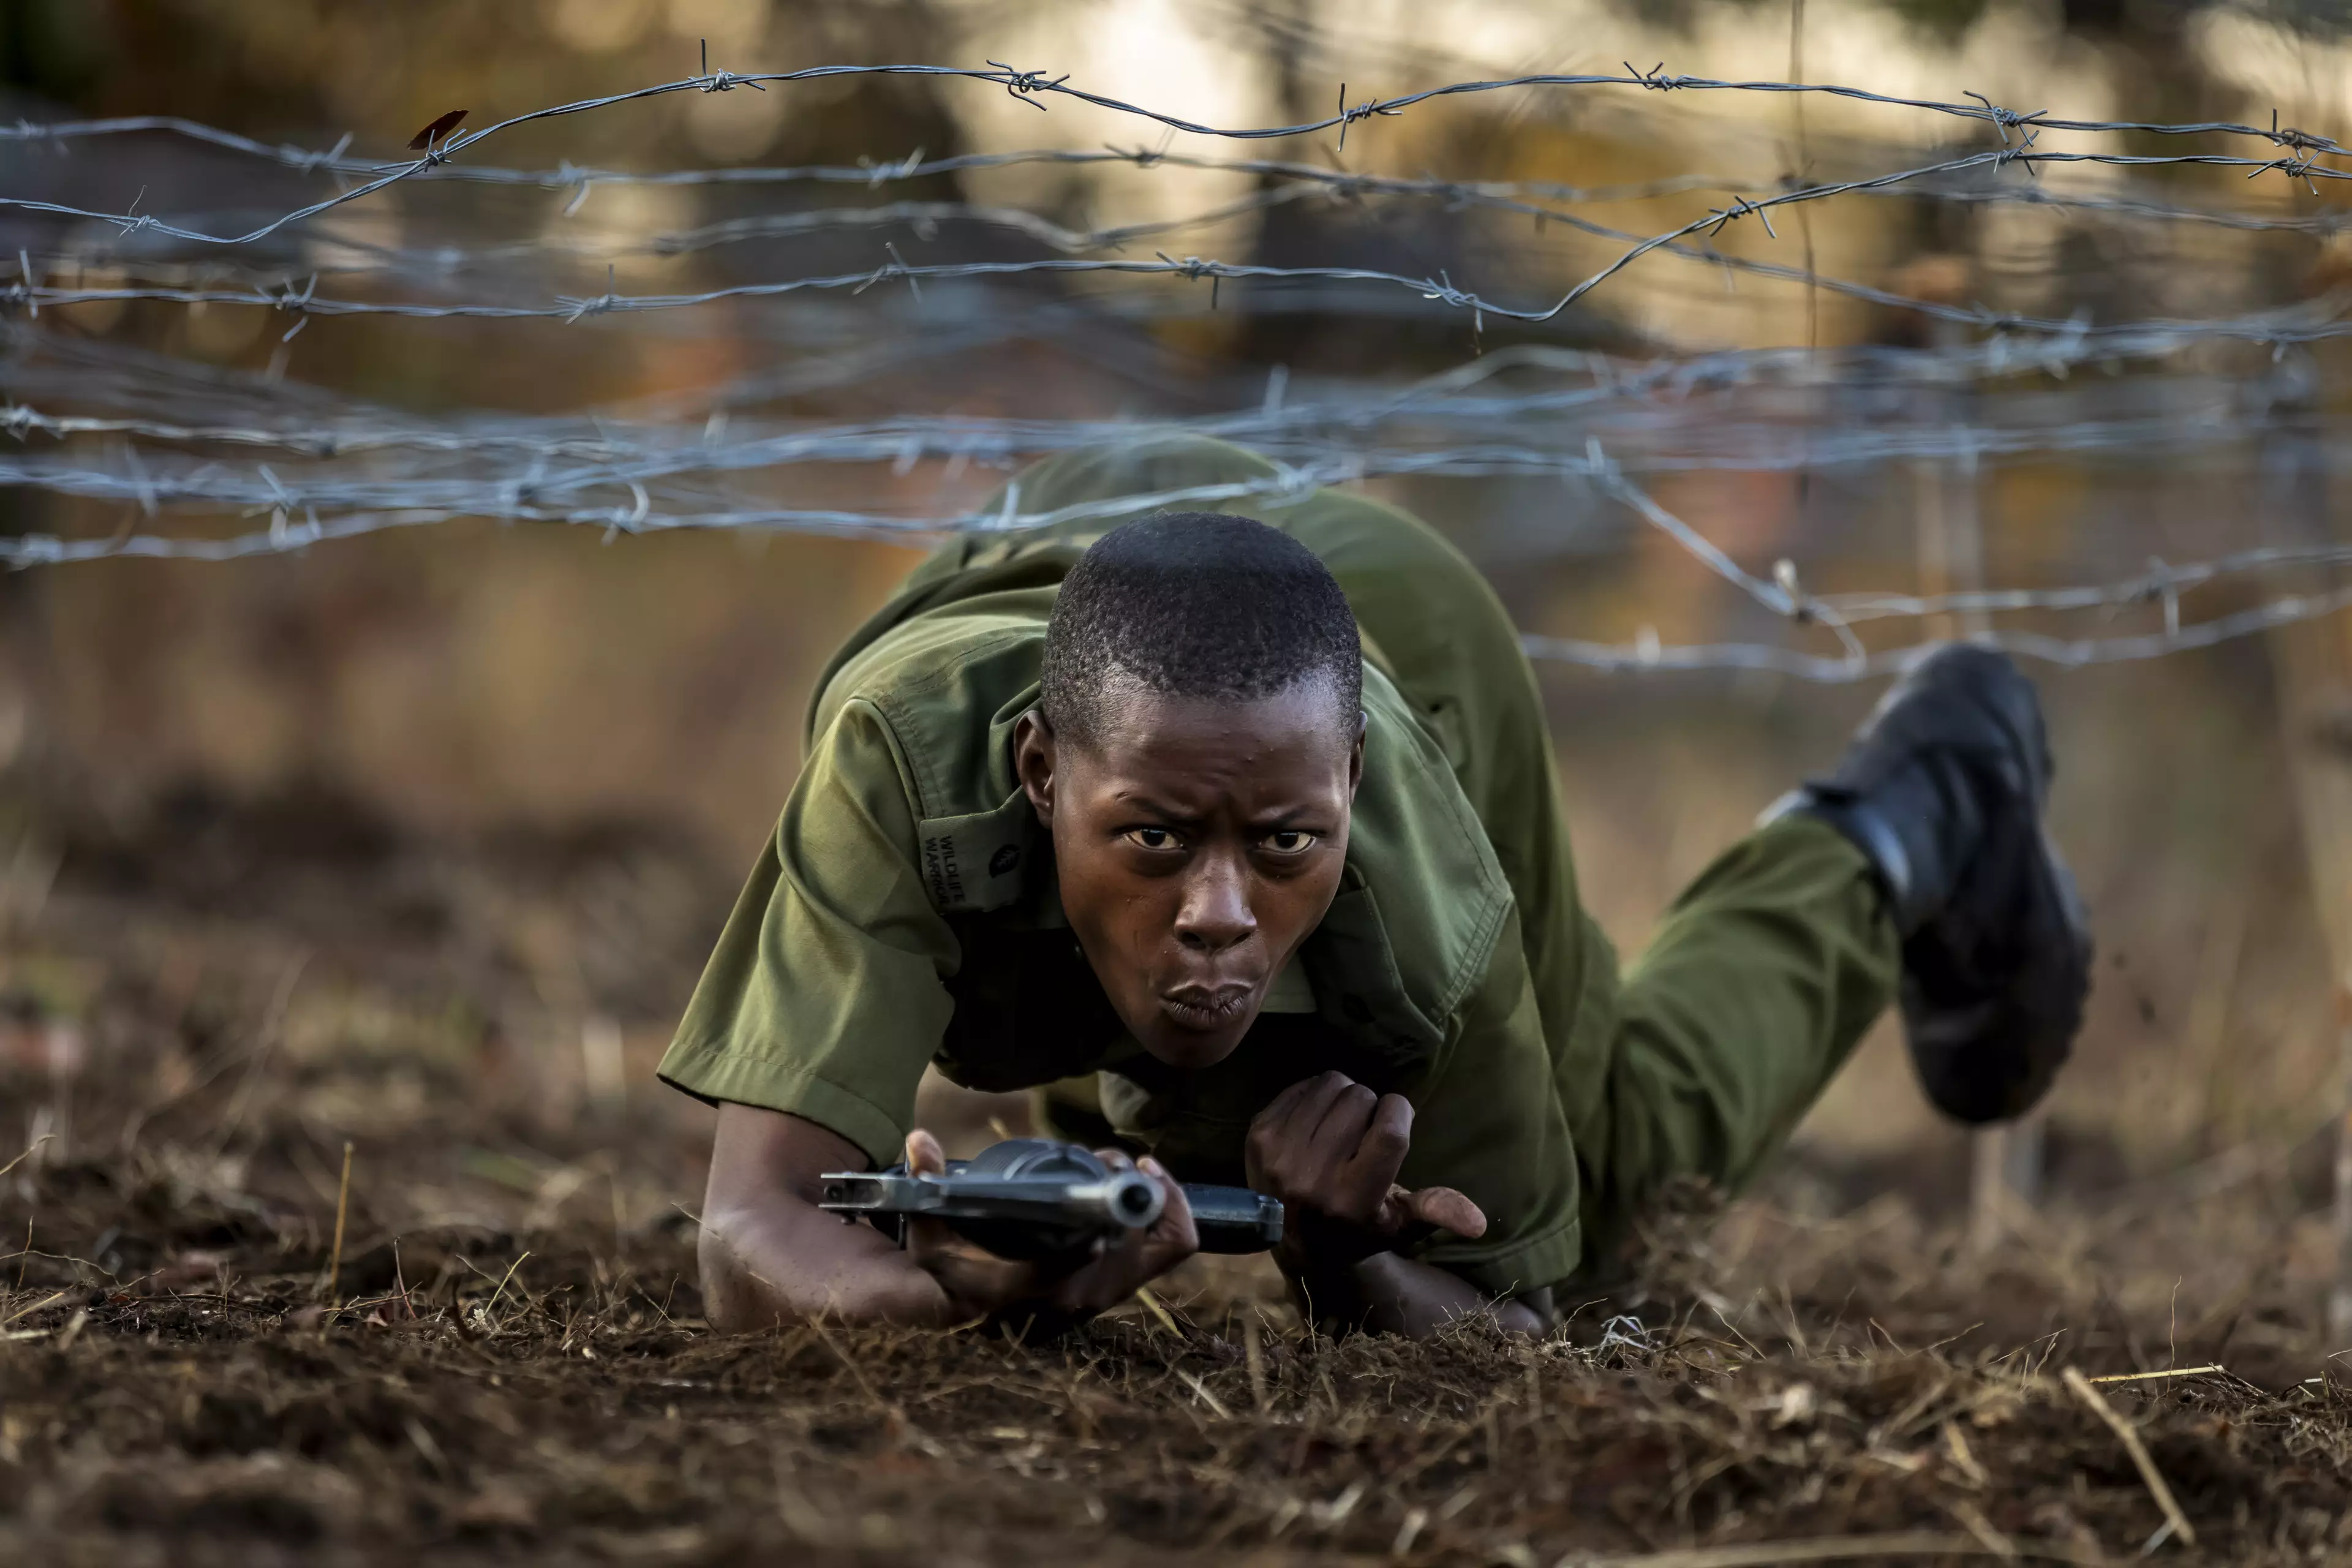 Nyaradzo was part of a team of 16 who protect wildlife in Zimbabwe.